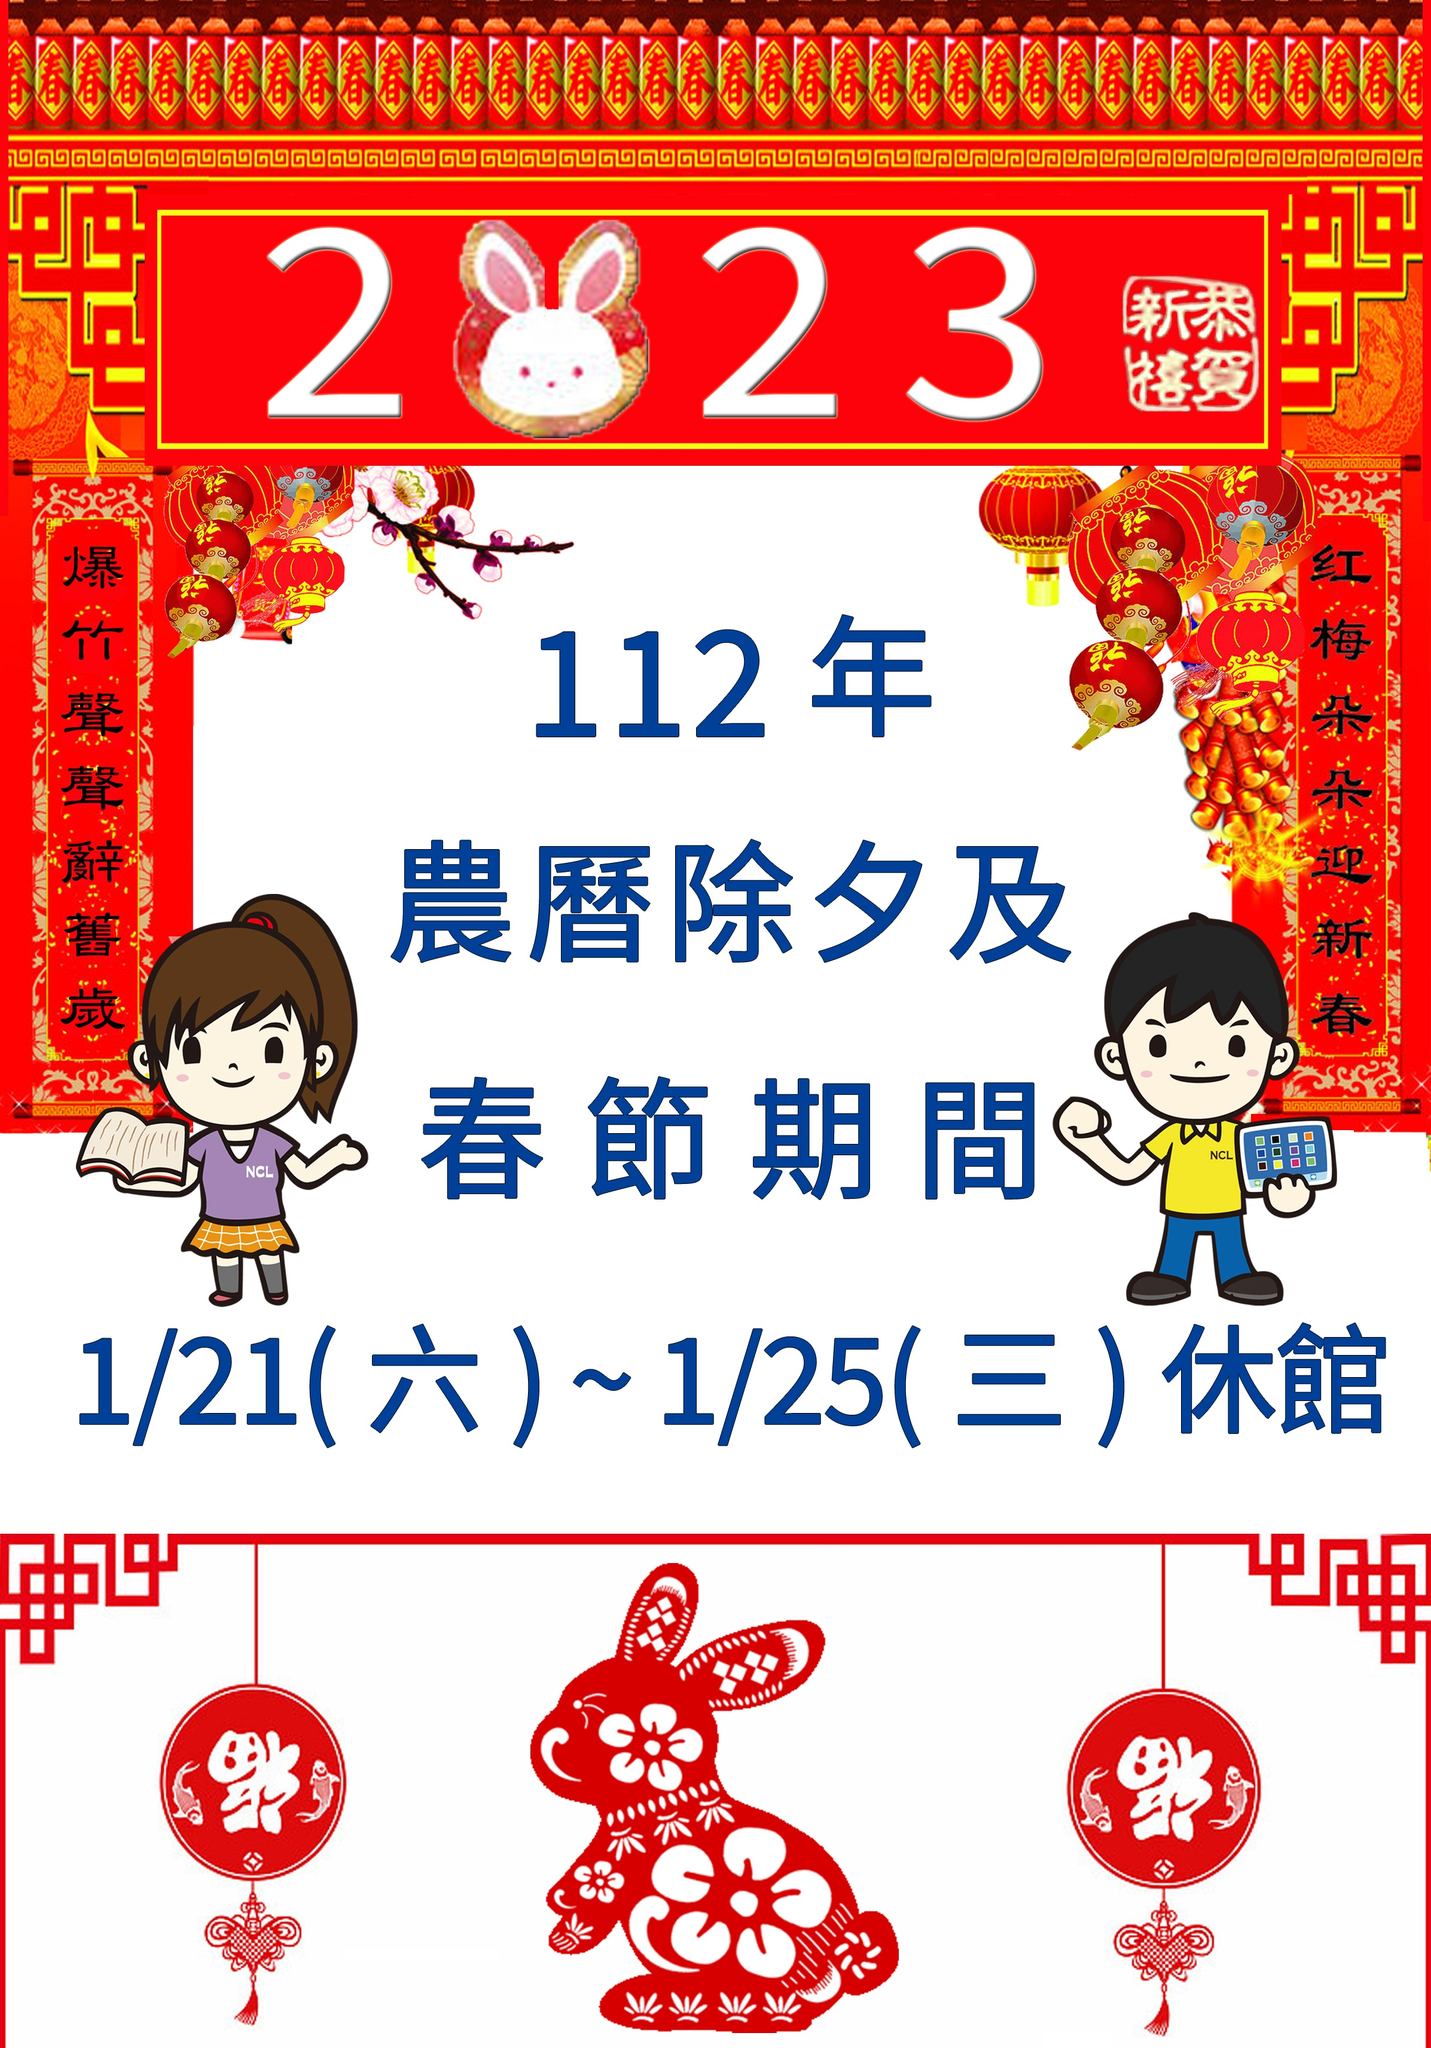 Due to Lunar New Year Vacation, National Central Library and Center for Chinese Studies will be Closed for the Period